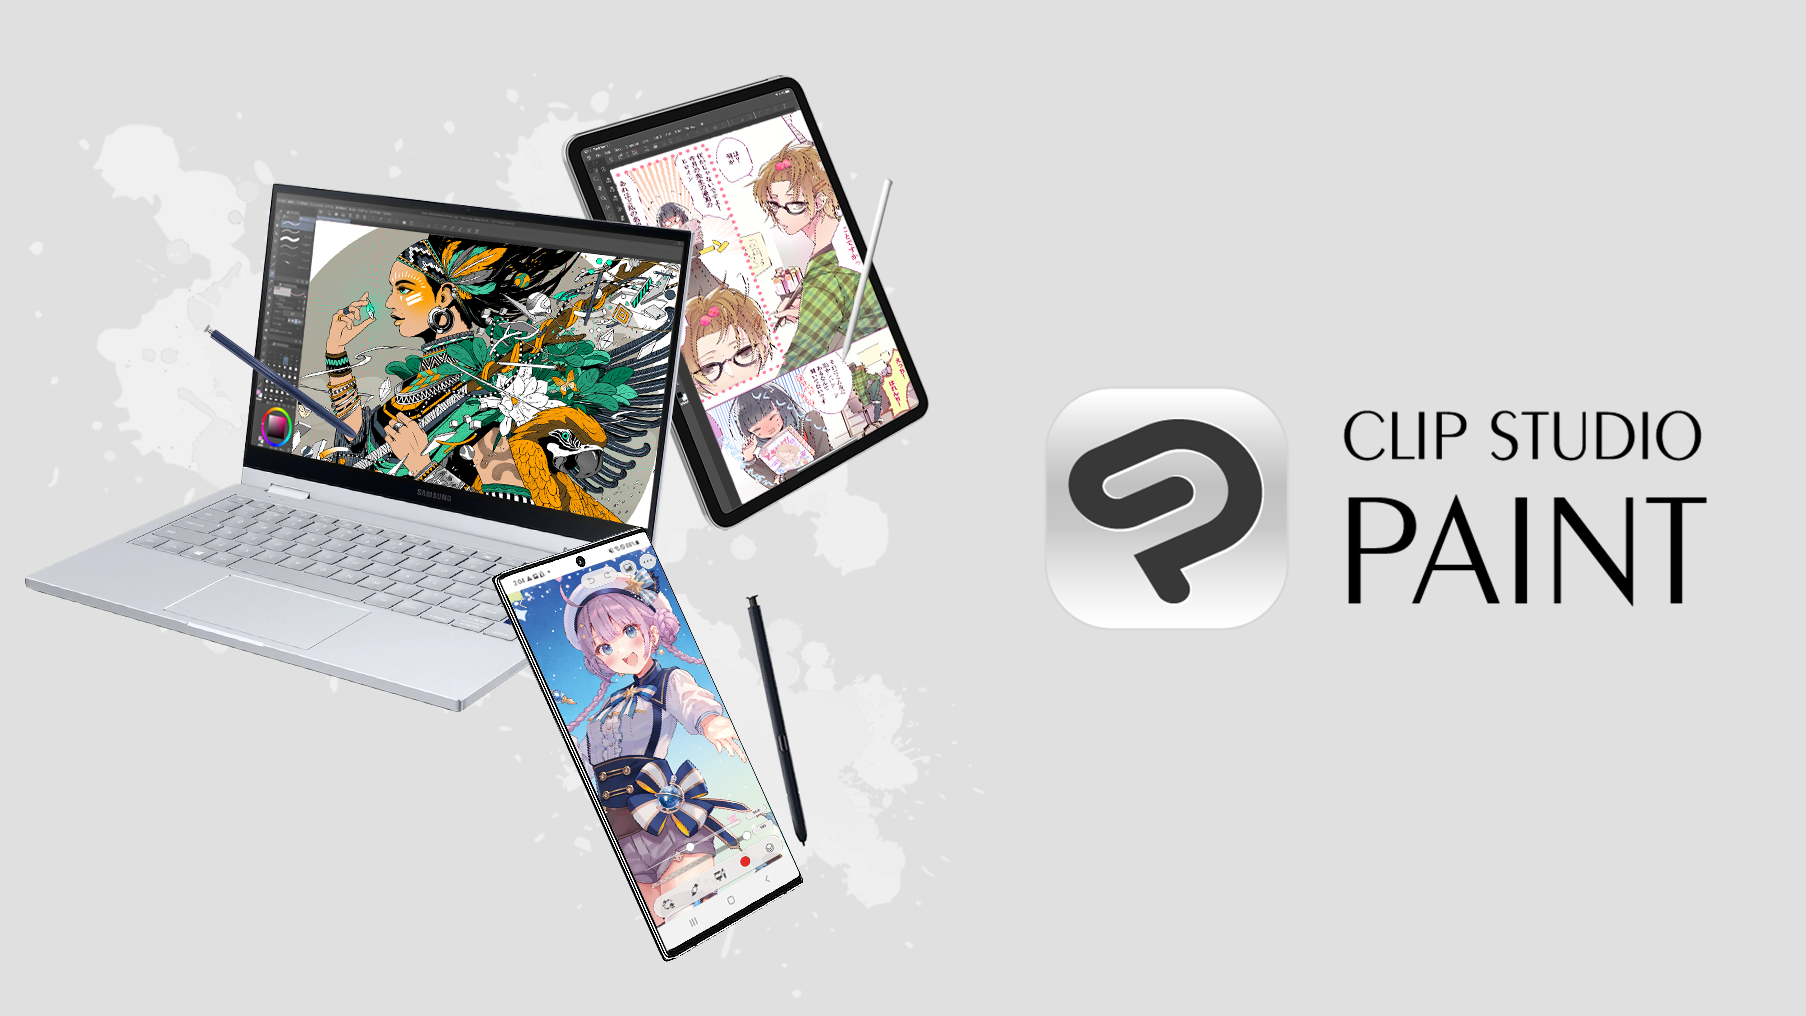 Celsys&#039; illustration and comic creation SaaS, Clip Studio Paint, undergoes price revision to increase profitability and ensure continued service